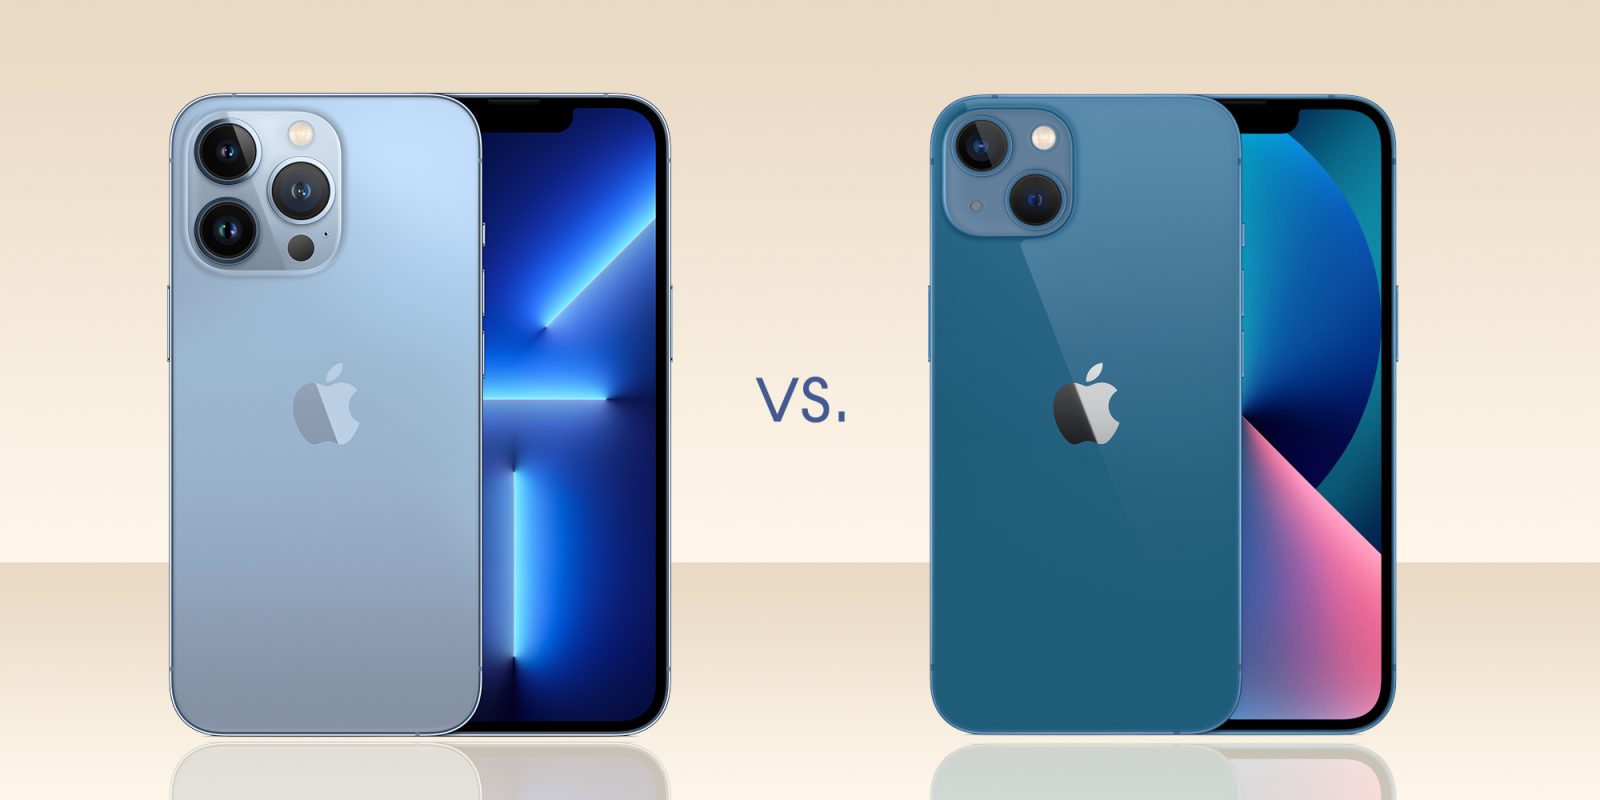 iPhone 13 vs. iPhone 13 Pro: Which should you buy in 2022?